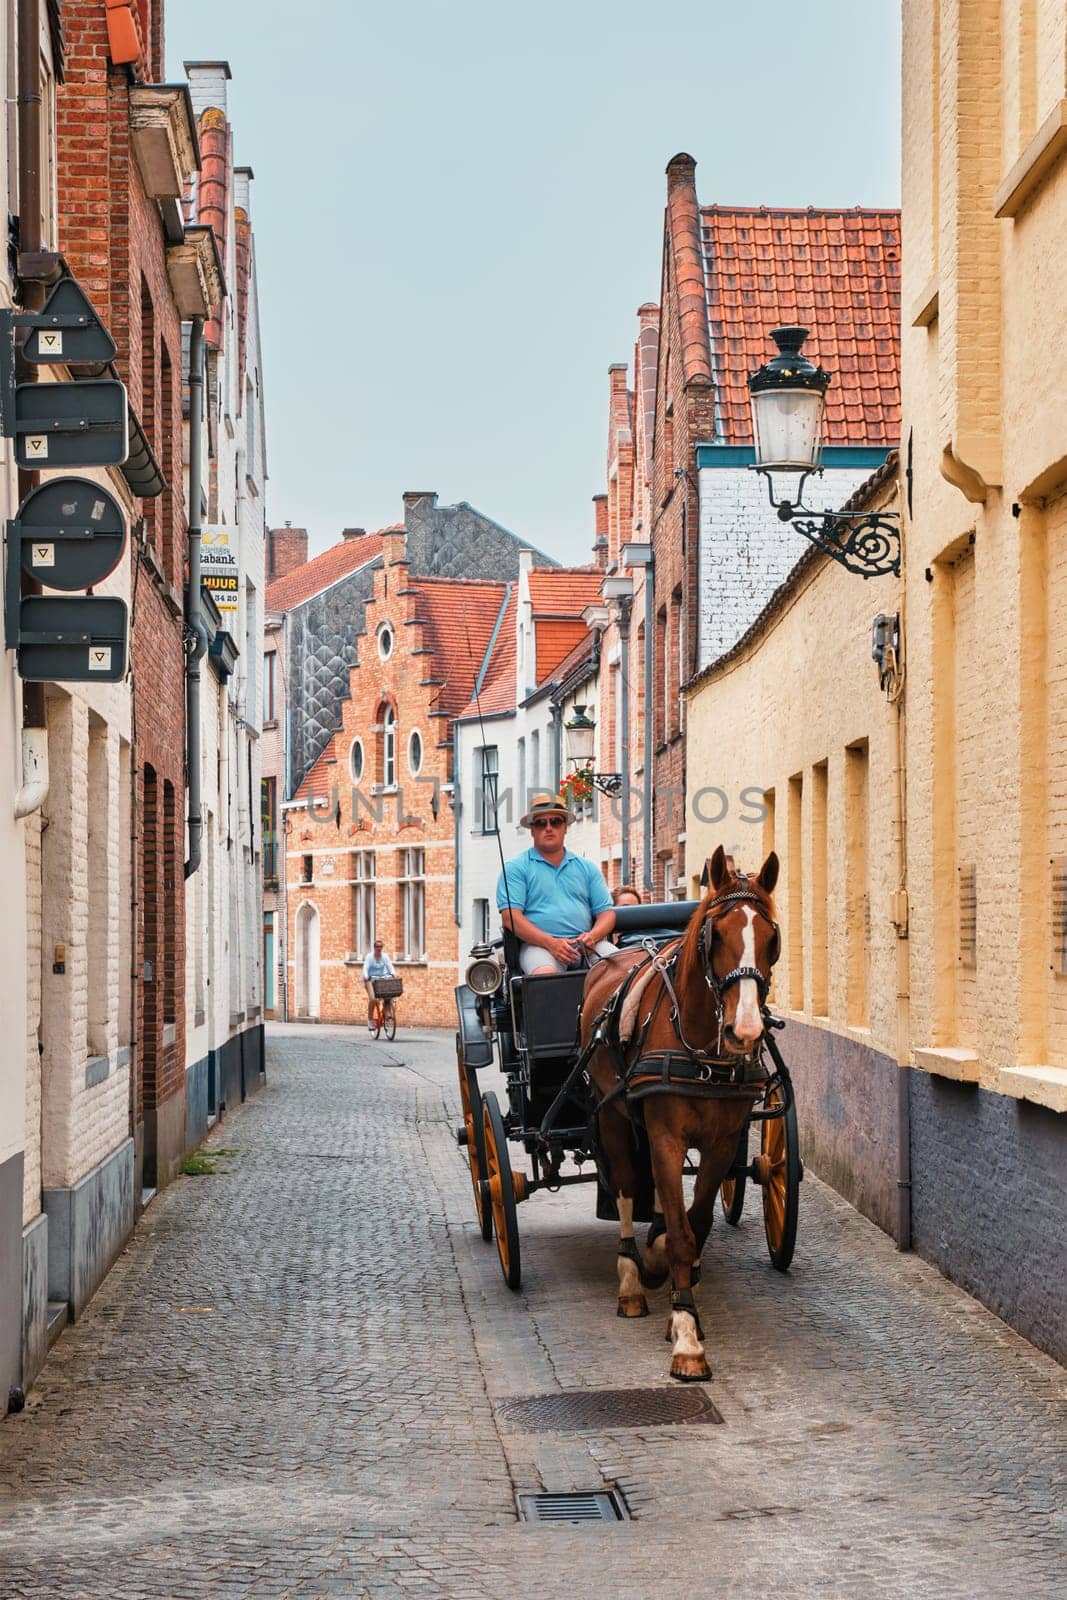 Horse cart for tourists in street of Brugge by dimol